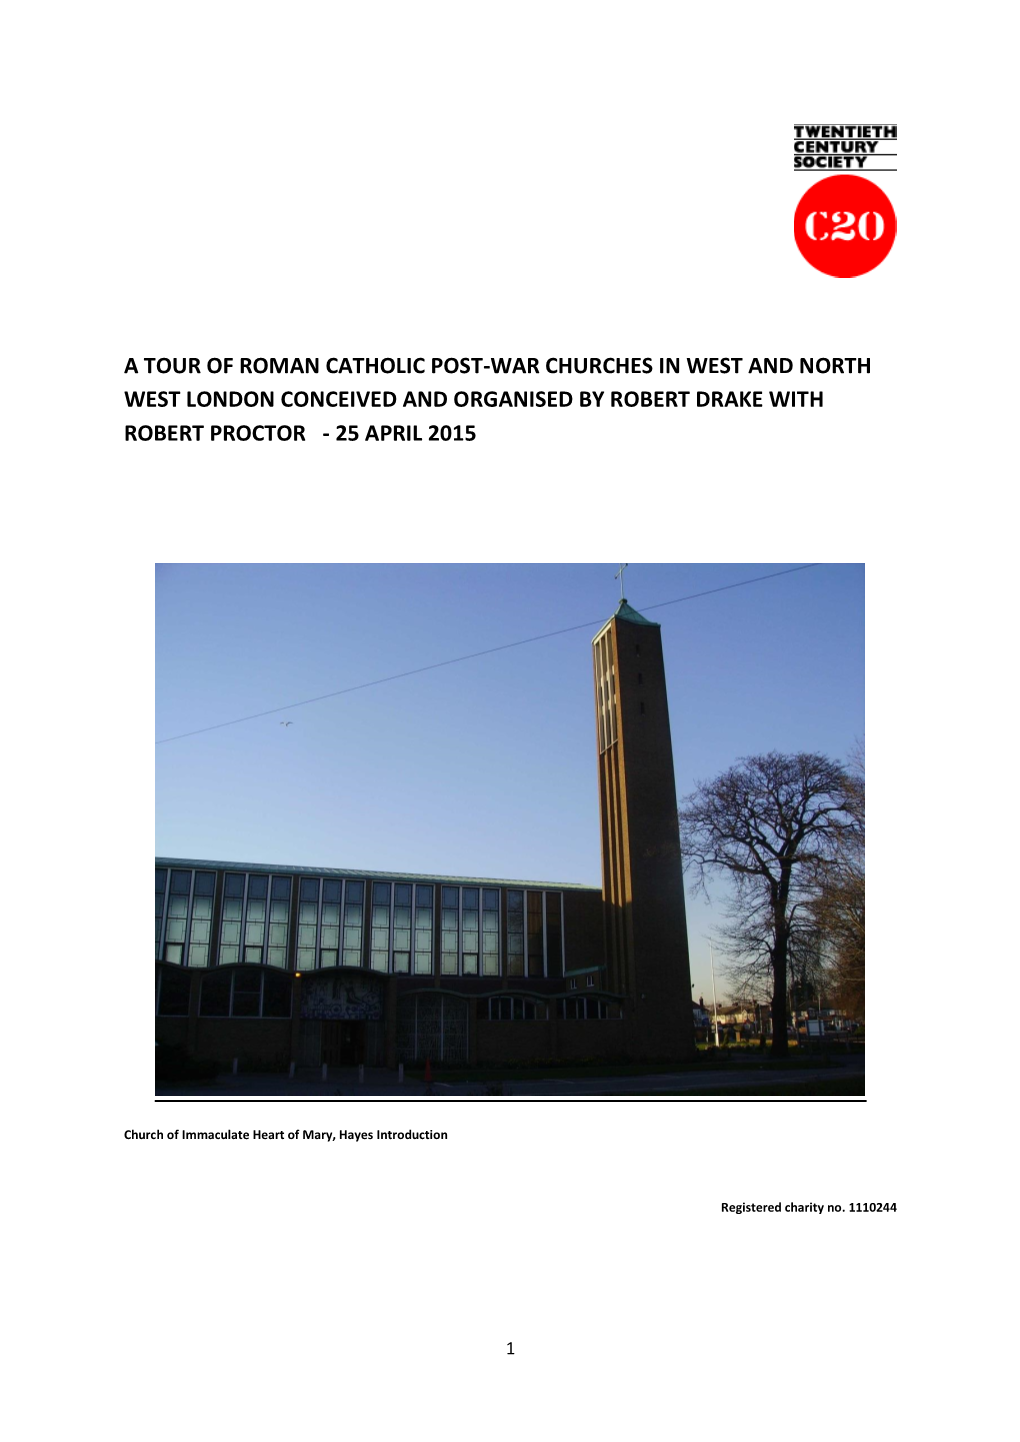 A Tour of Roman Catholic Post-War Churches in West and North West London Conceived and Organised by Robert Drake with Robert Proctor - 25 April 2015